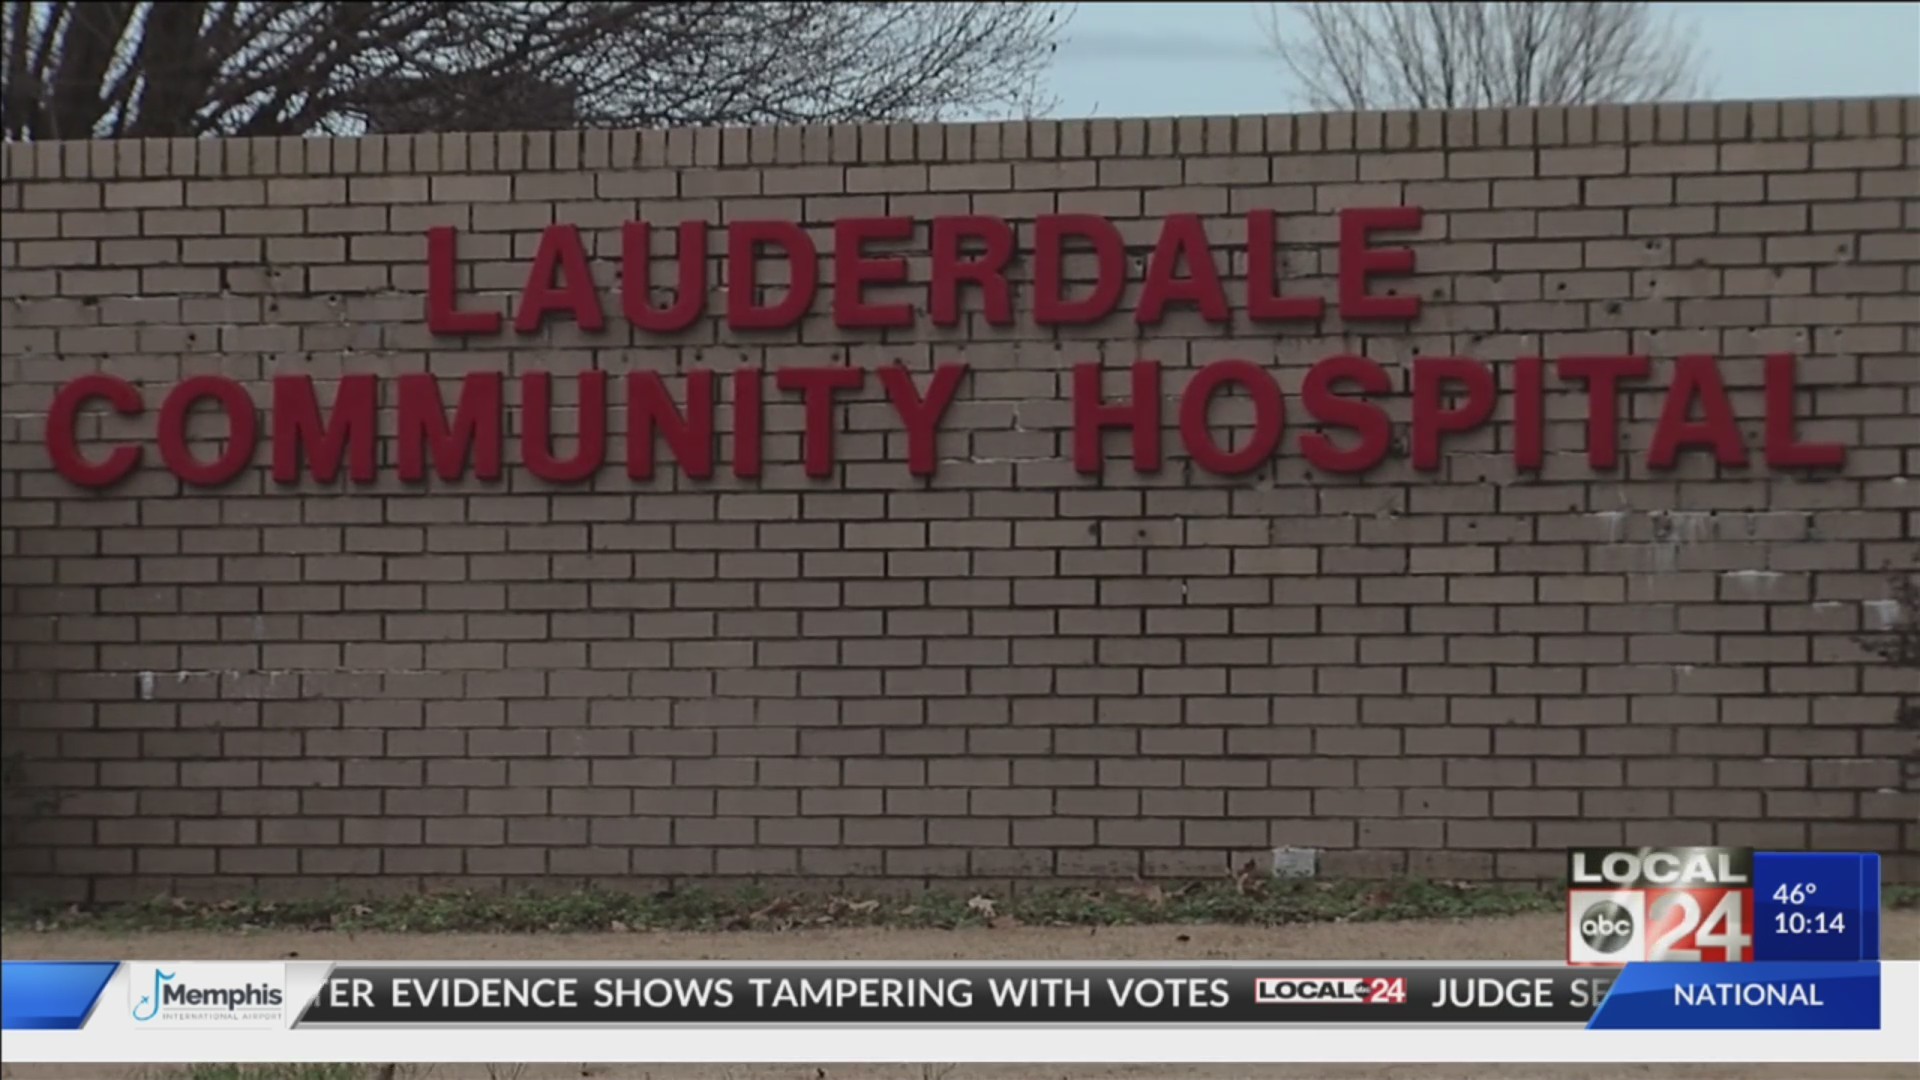 outside receiver to manage finances for Lauderdale Community Hospital